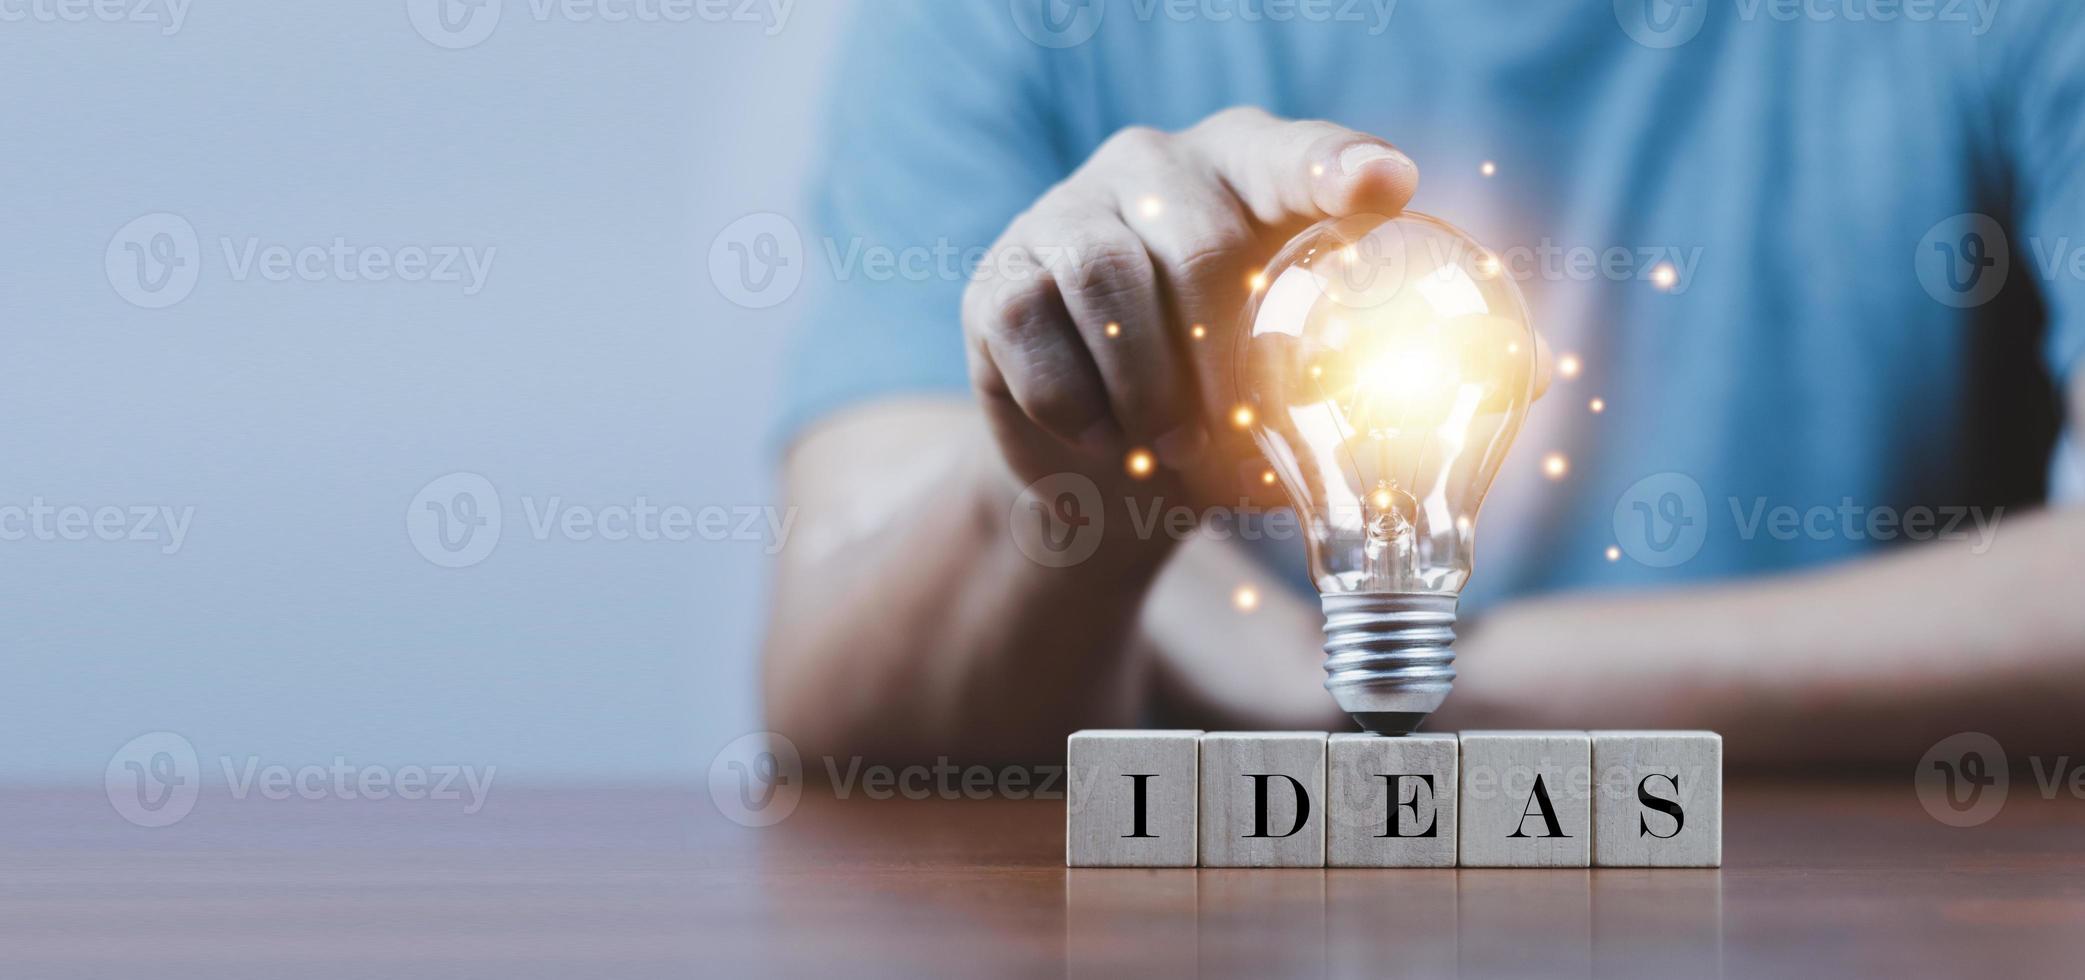 hand touching on light bulb on wood block with Word Ideas, new idea concept with innovation and inspiration, innovative technology in science and communication concept. photo